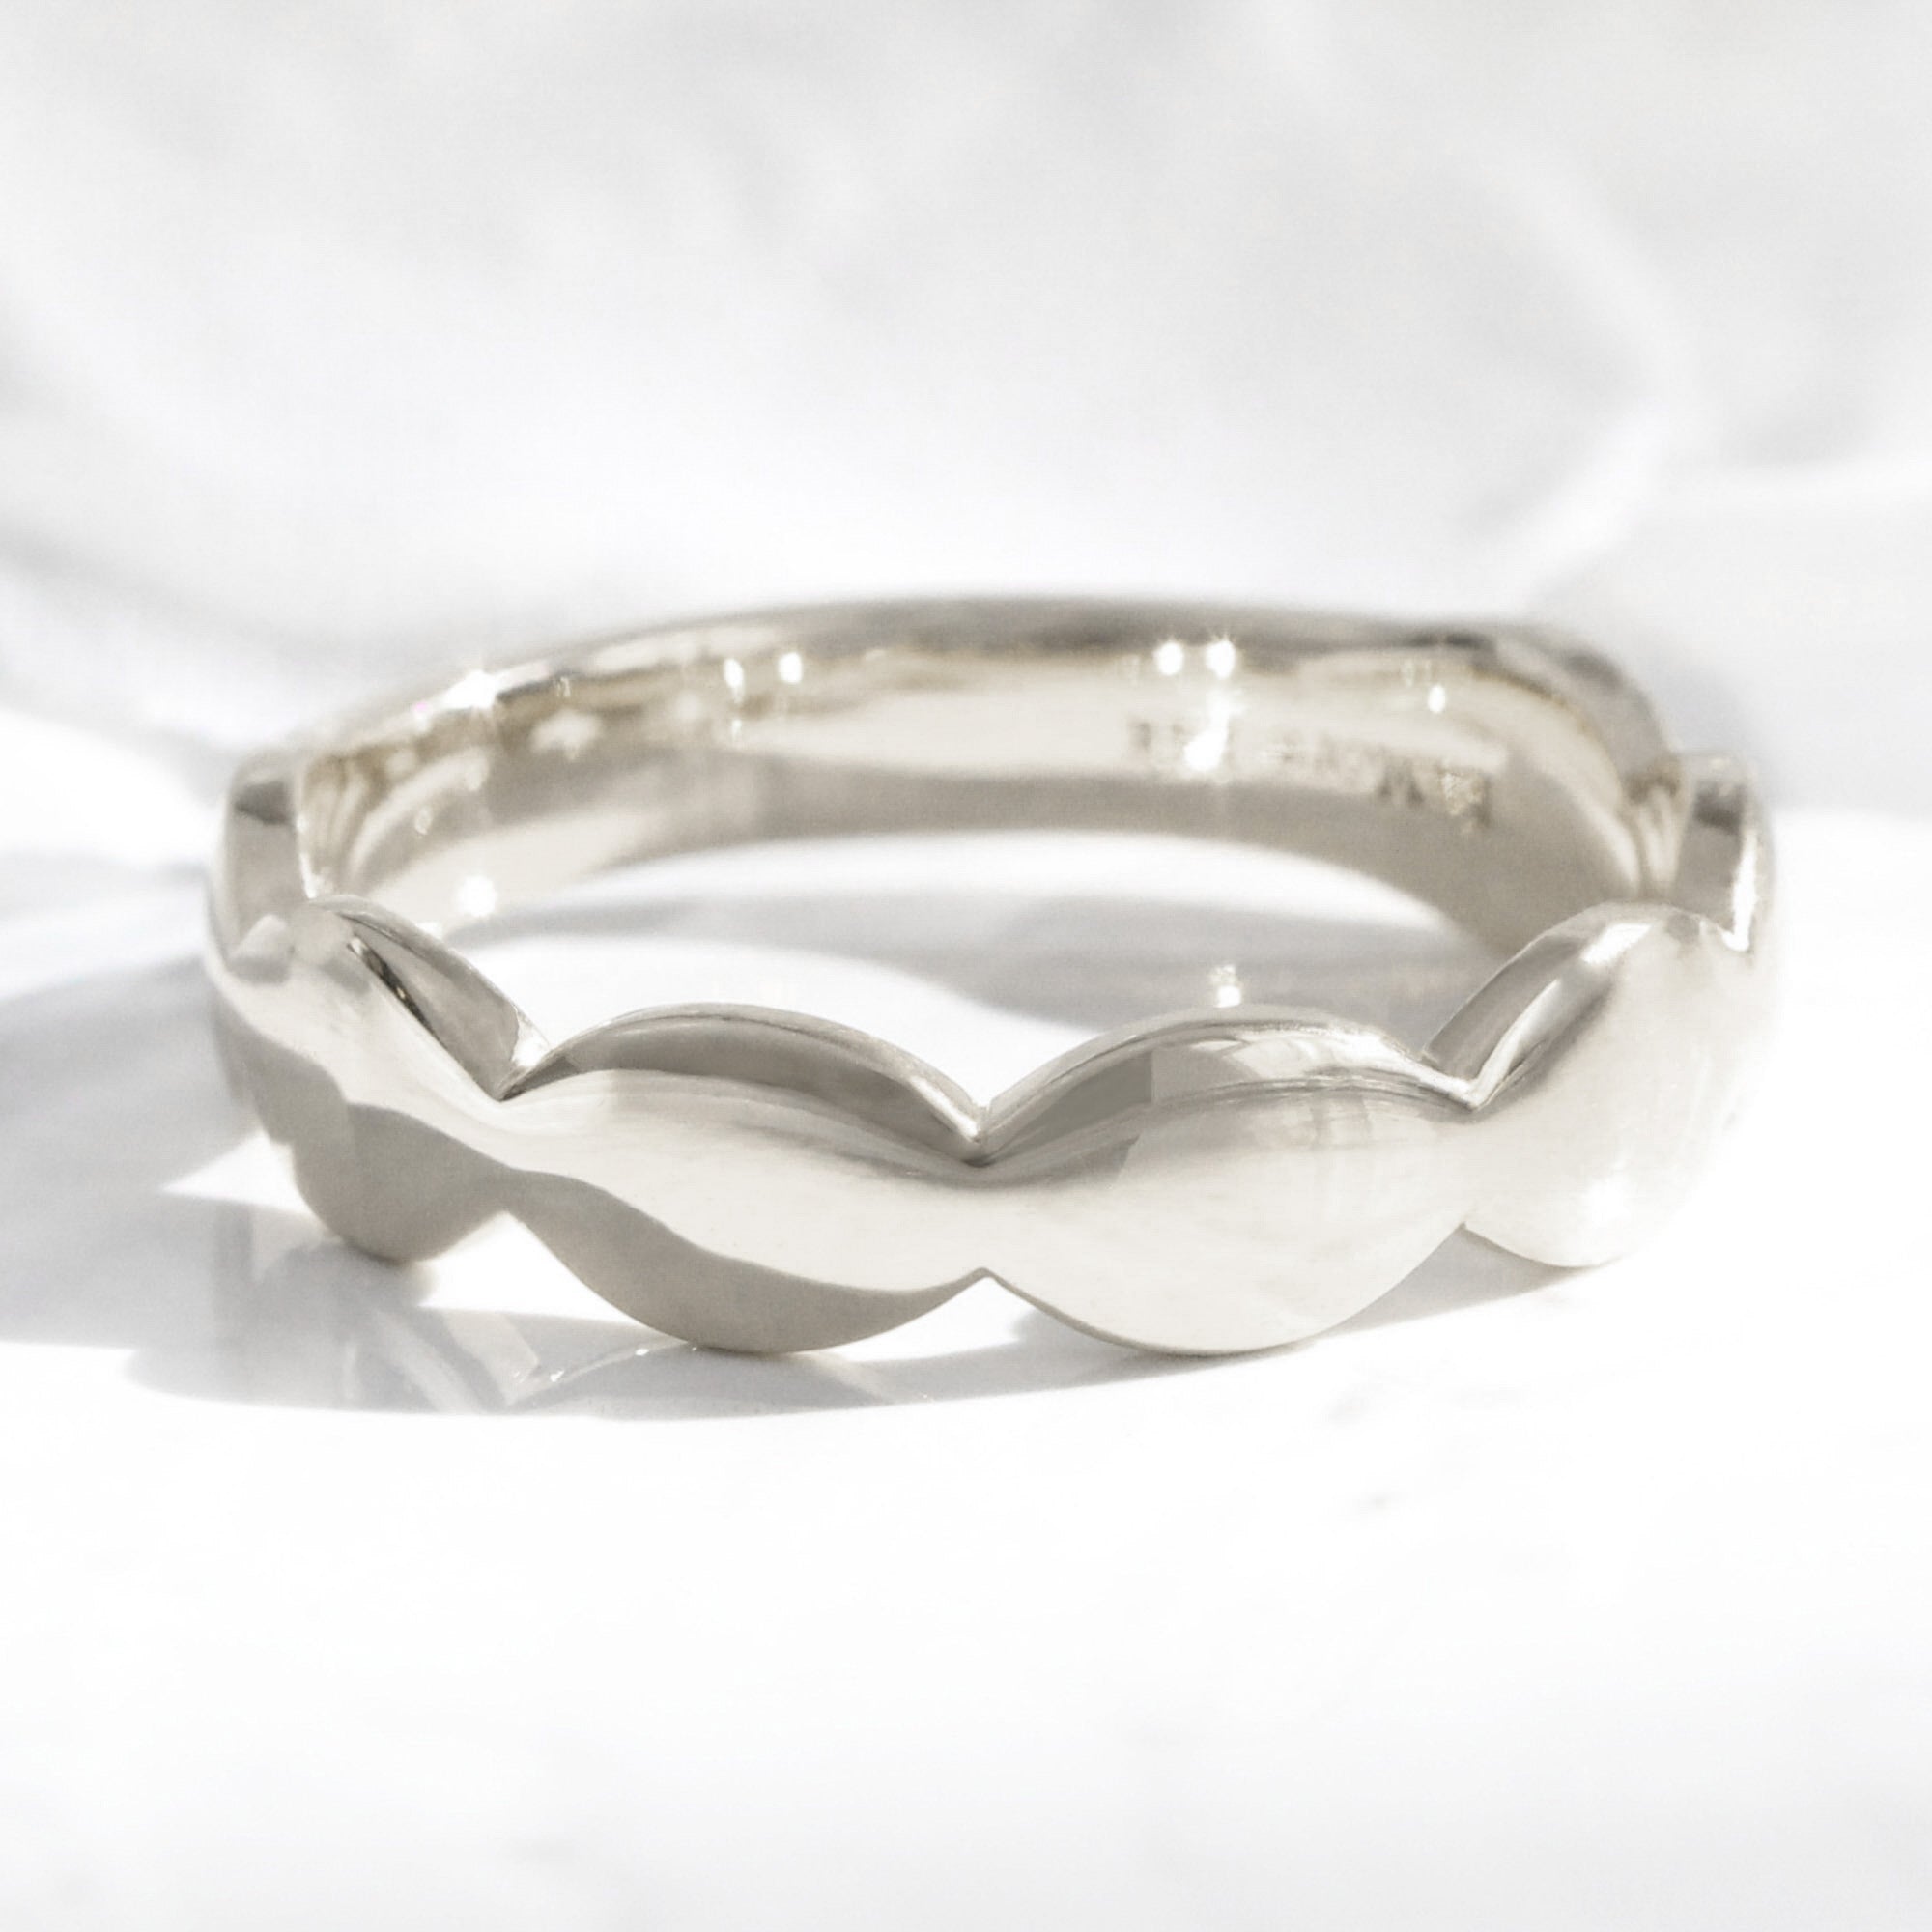 Unique gender neutral wedding ring, scalloped wedding band white gold wide wedding band la more design jewelry